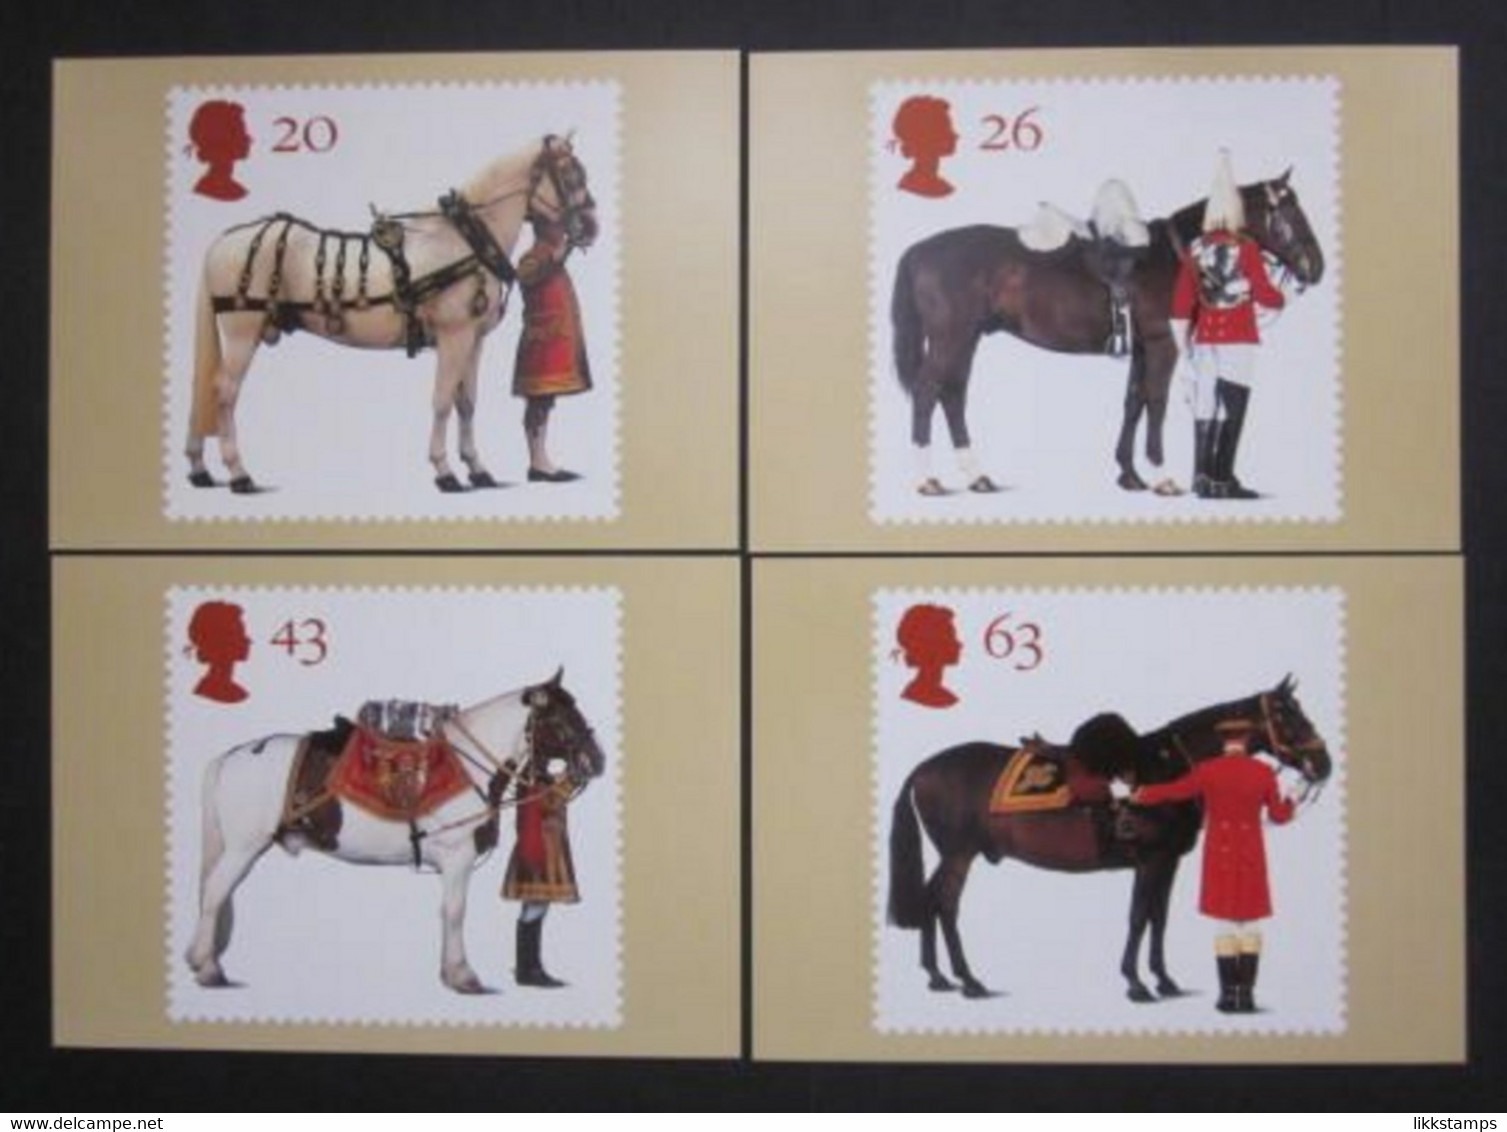 1997 THE 50th ANNIVERSARY OF THE BRITISH HORSE SOCIETY P.H.Q. CARDS UNUSED, ISSUE No. 189 (B) #00972 - PHQ Karten